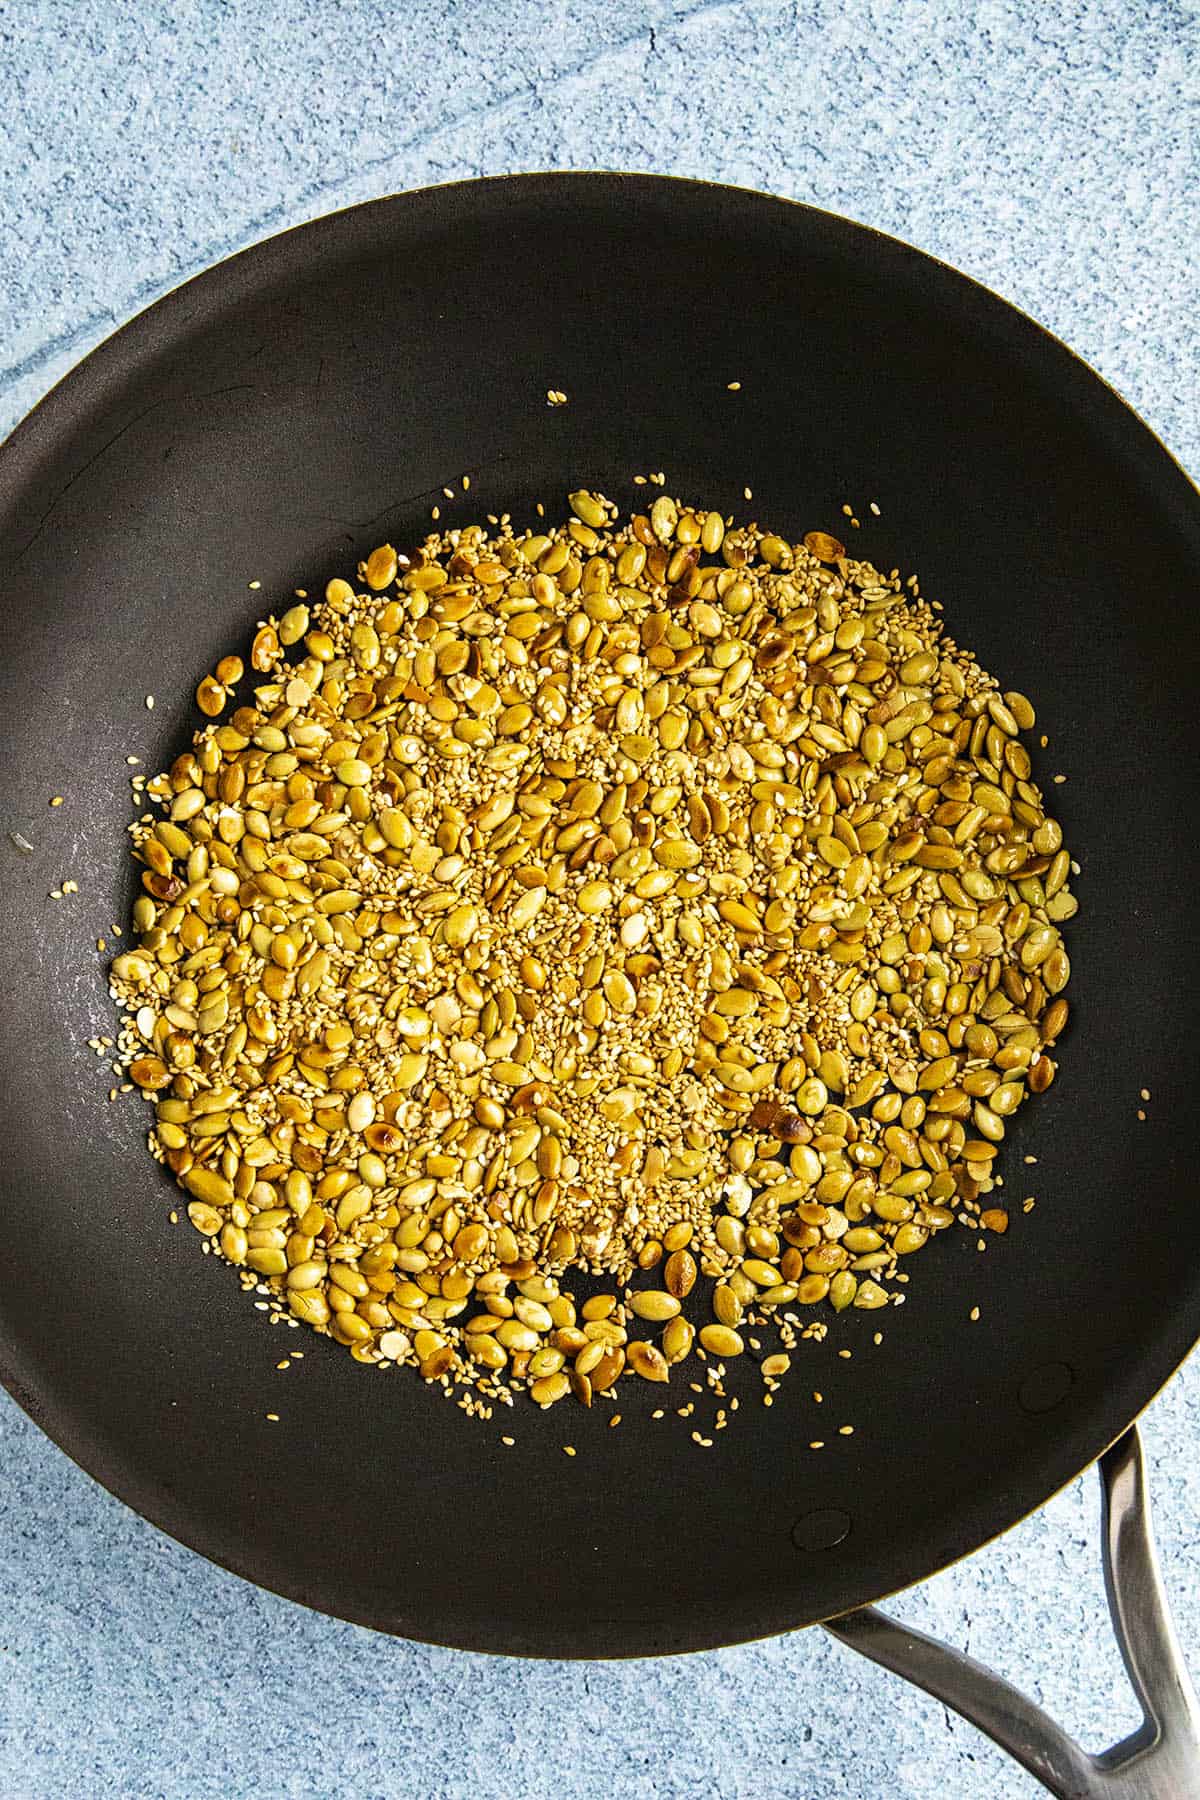 Toasting the nuts and seeds in a pan